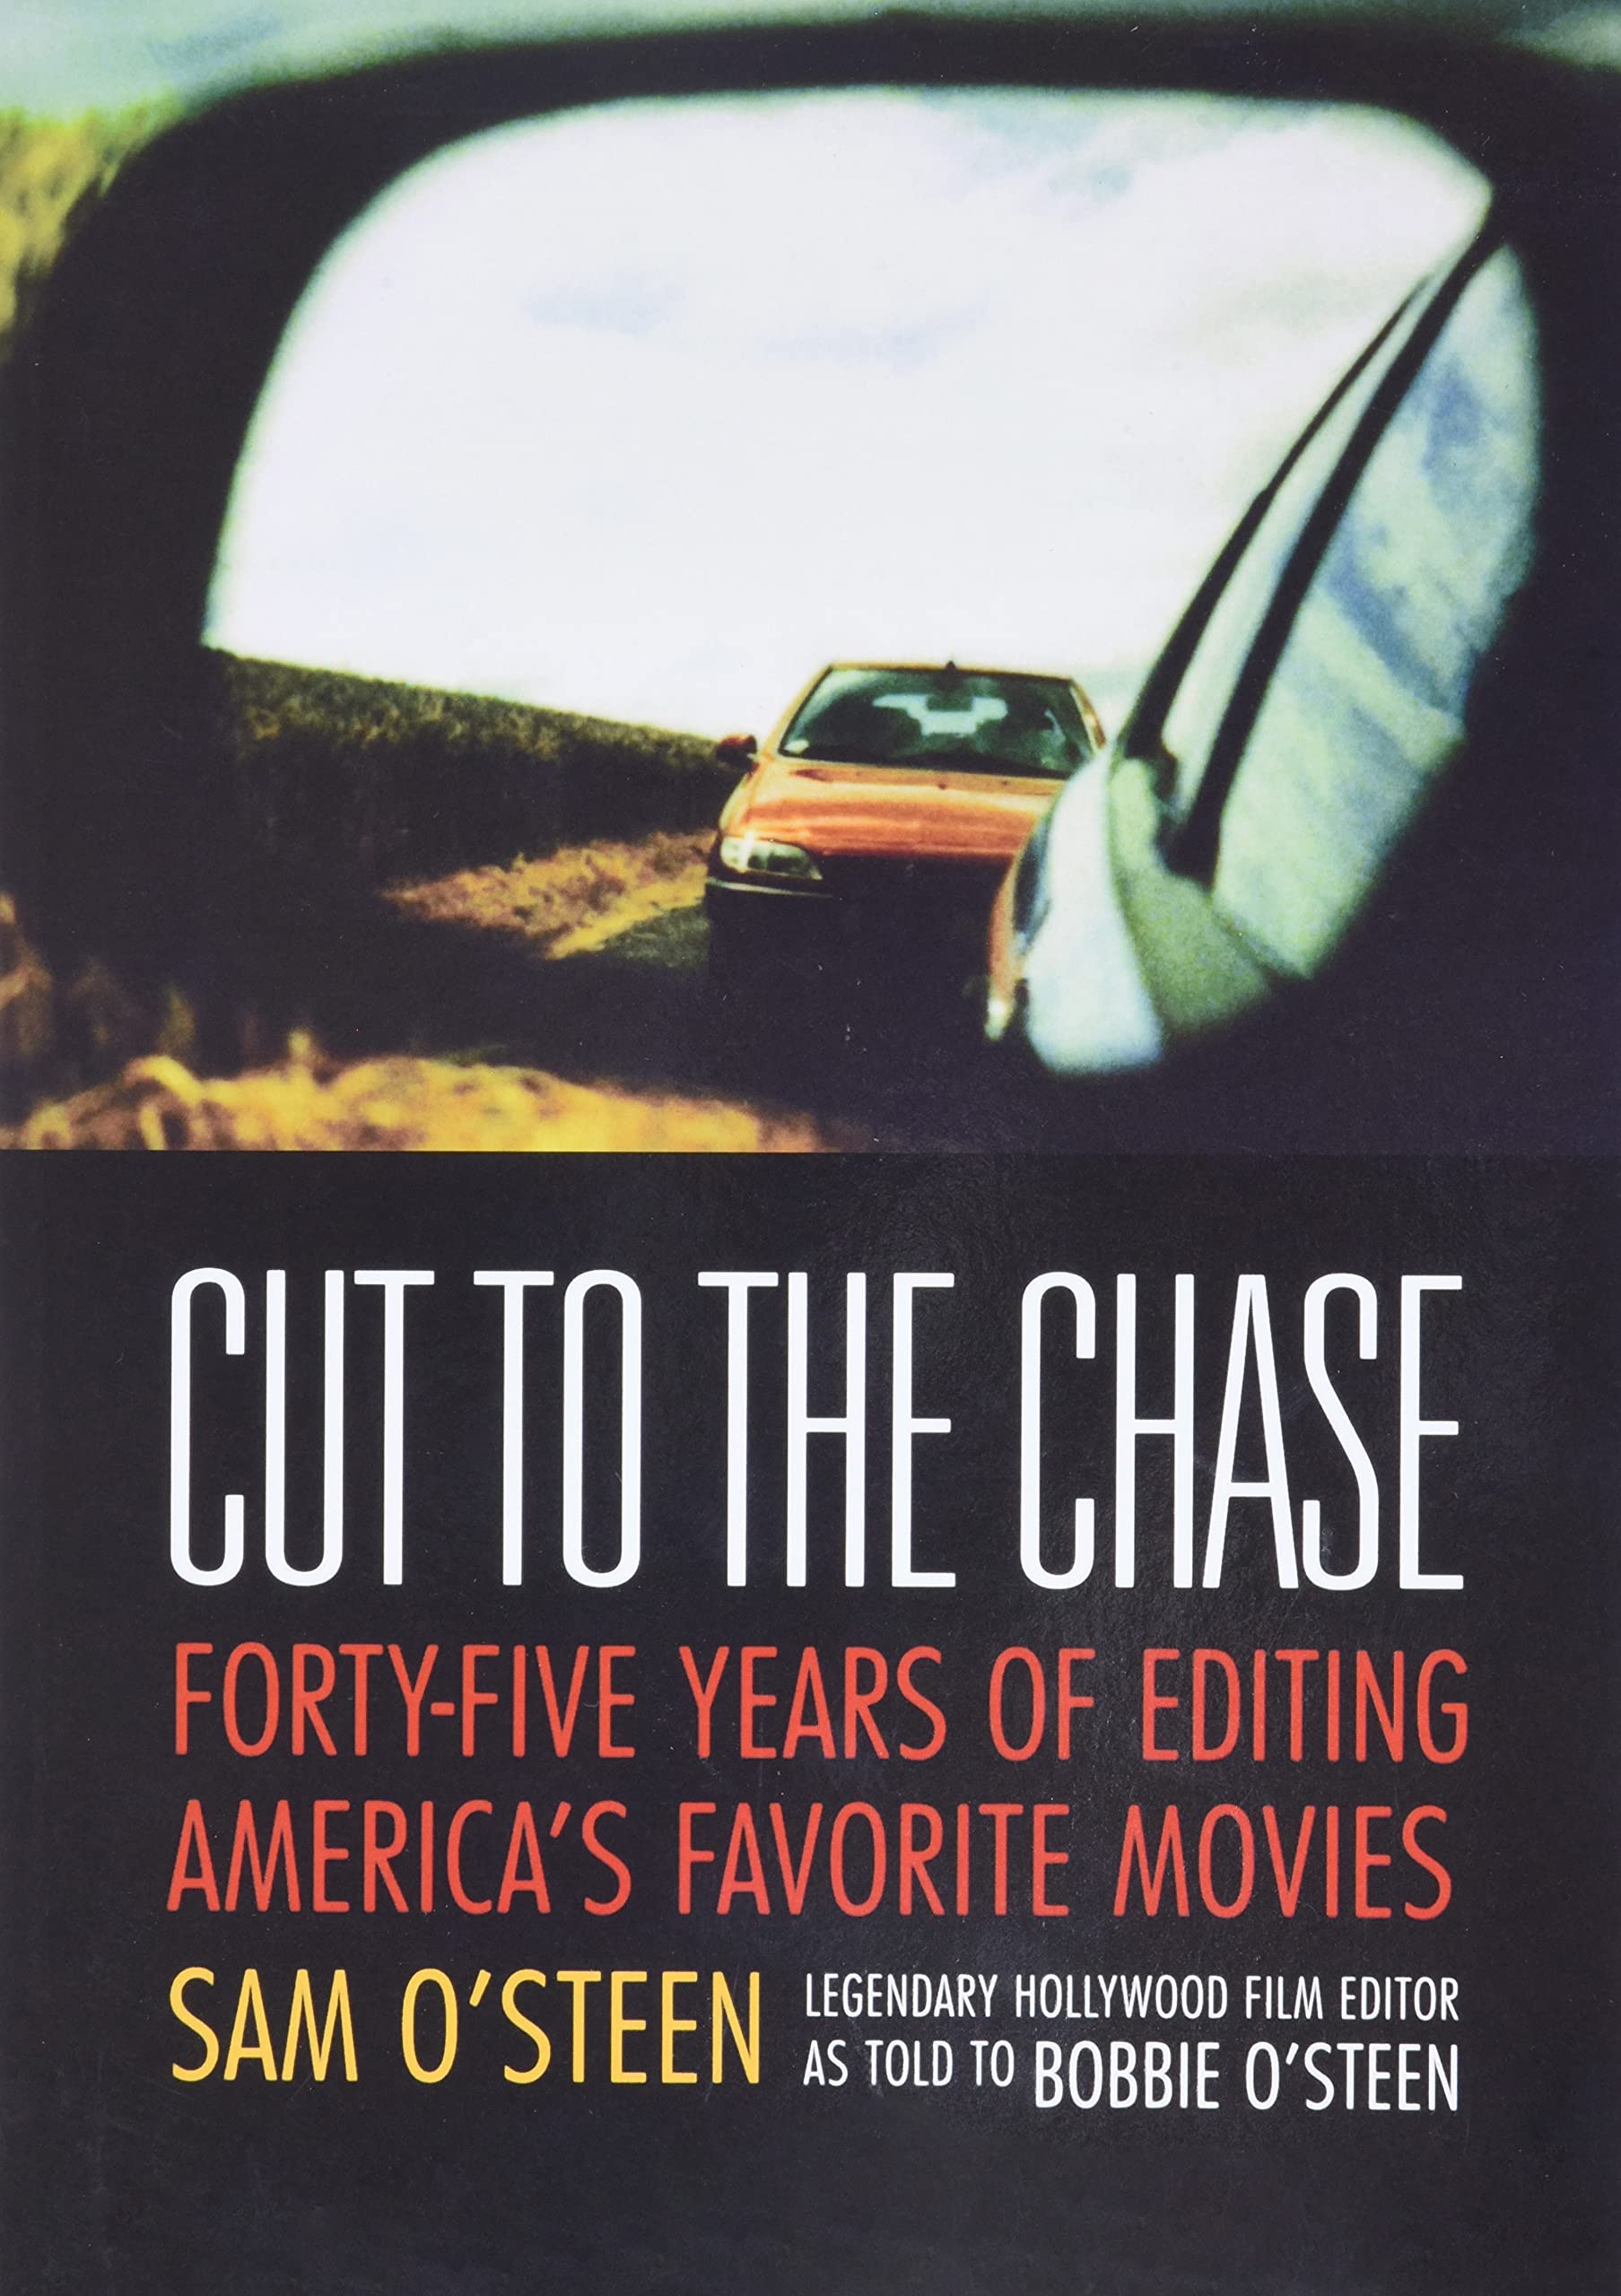 Cut to the Chase book cover